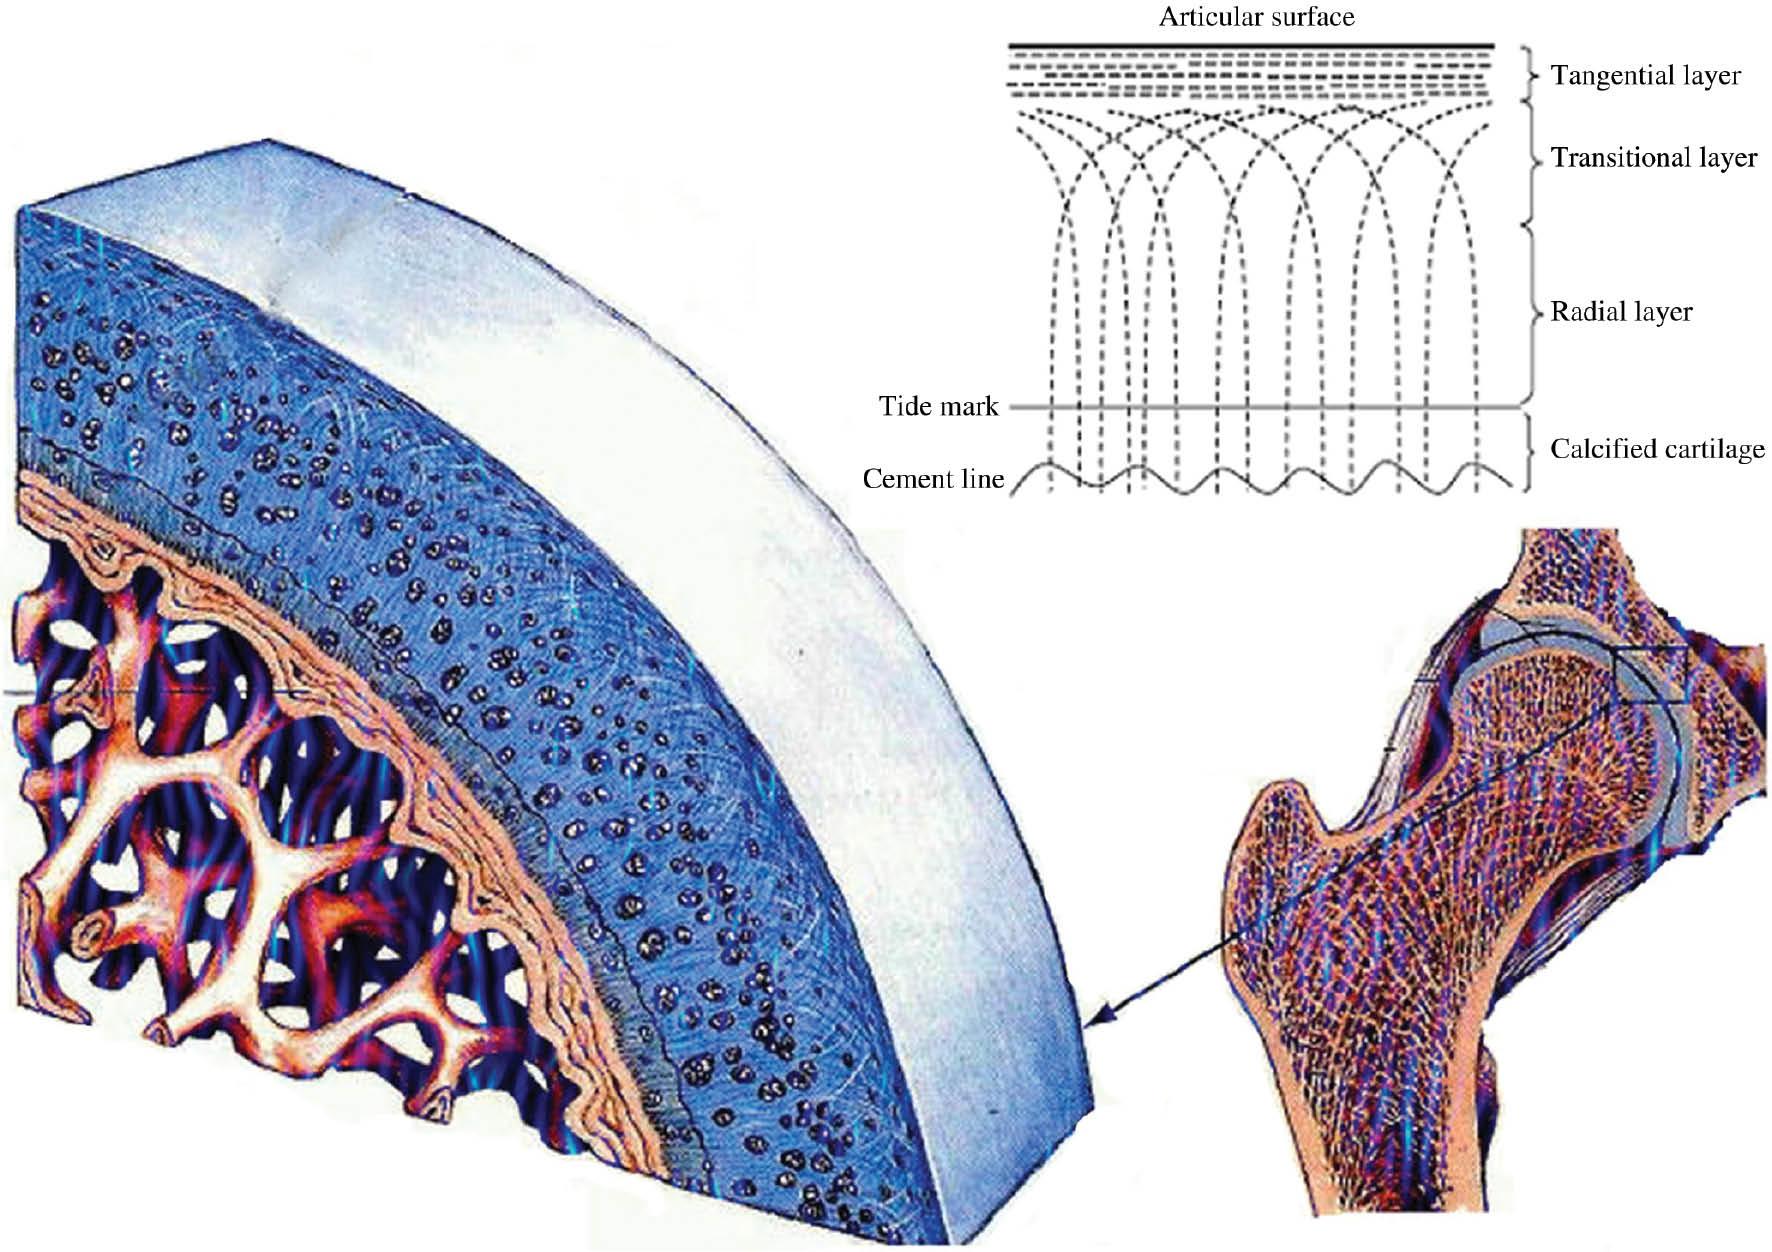 Complex structure of the bone–cartilage interface.